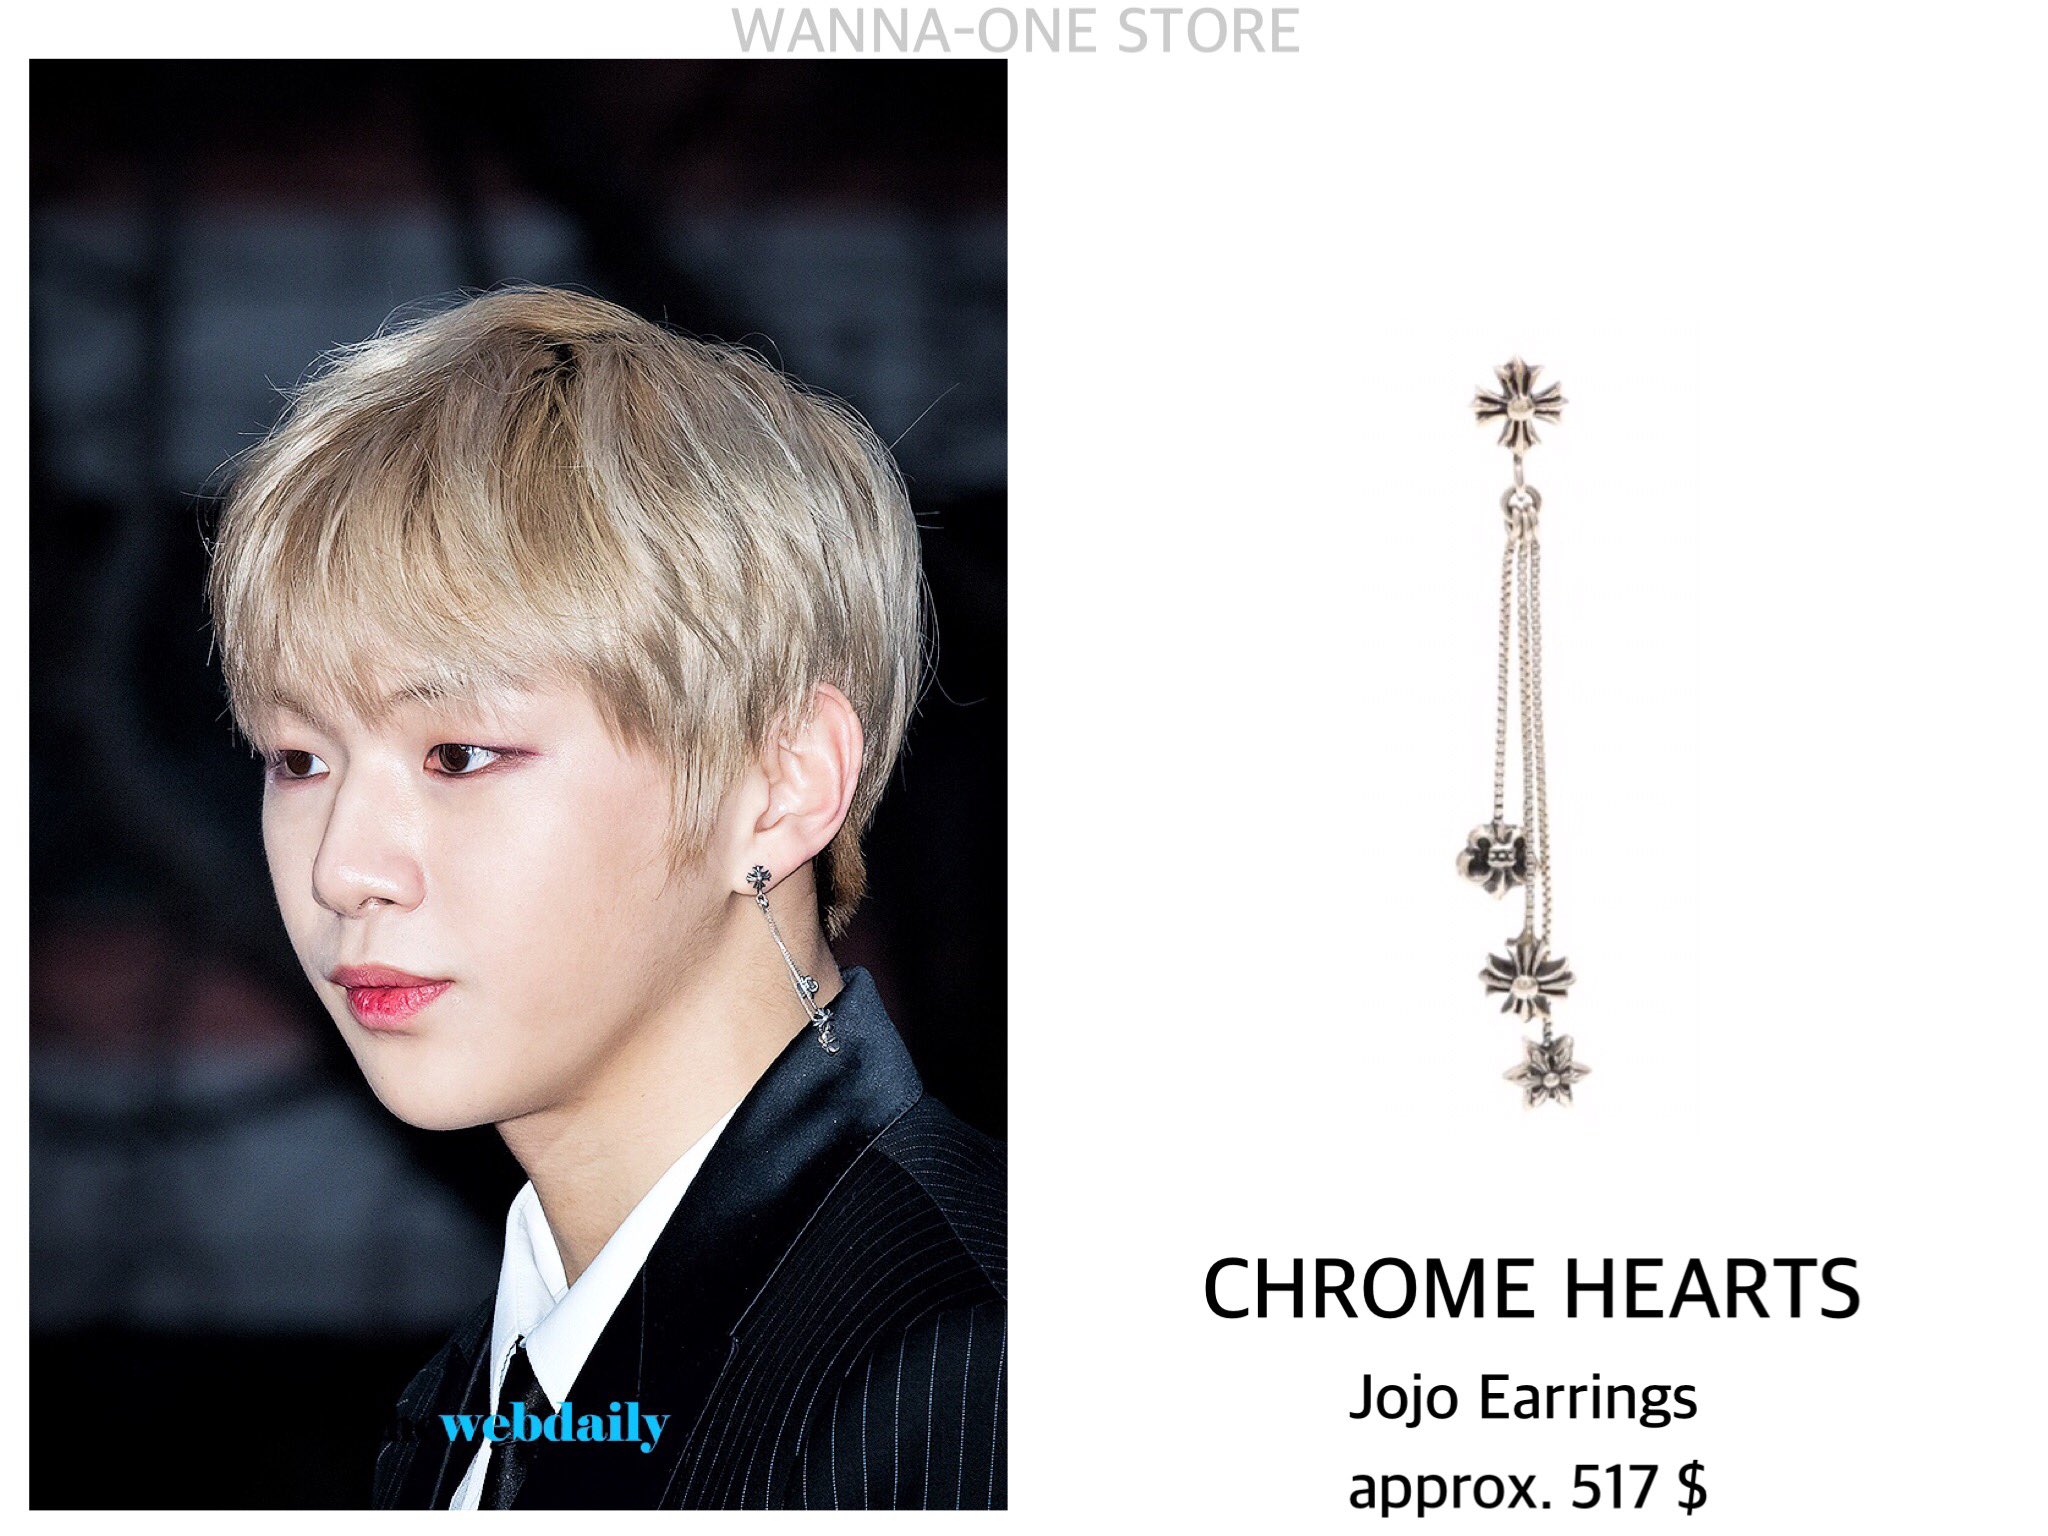 WANNA-ONE STORE on X: 